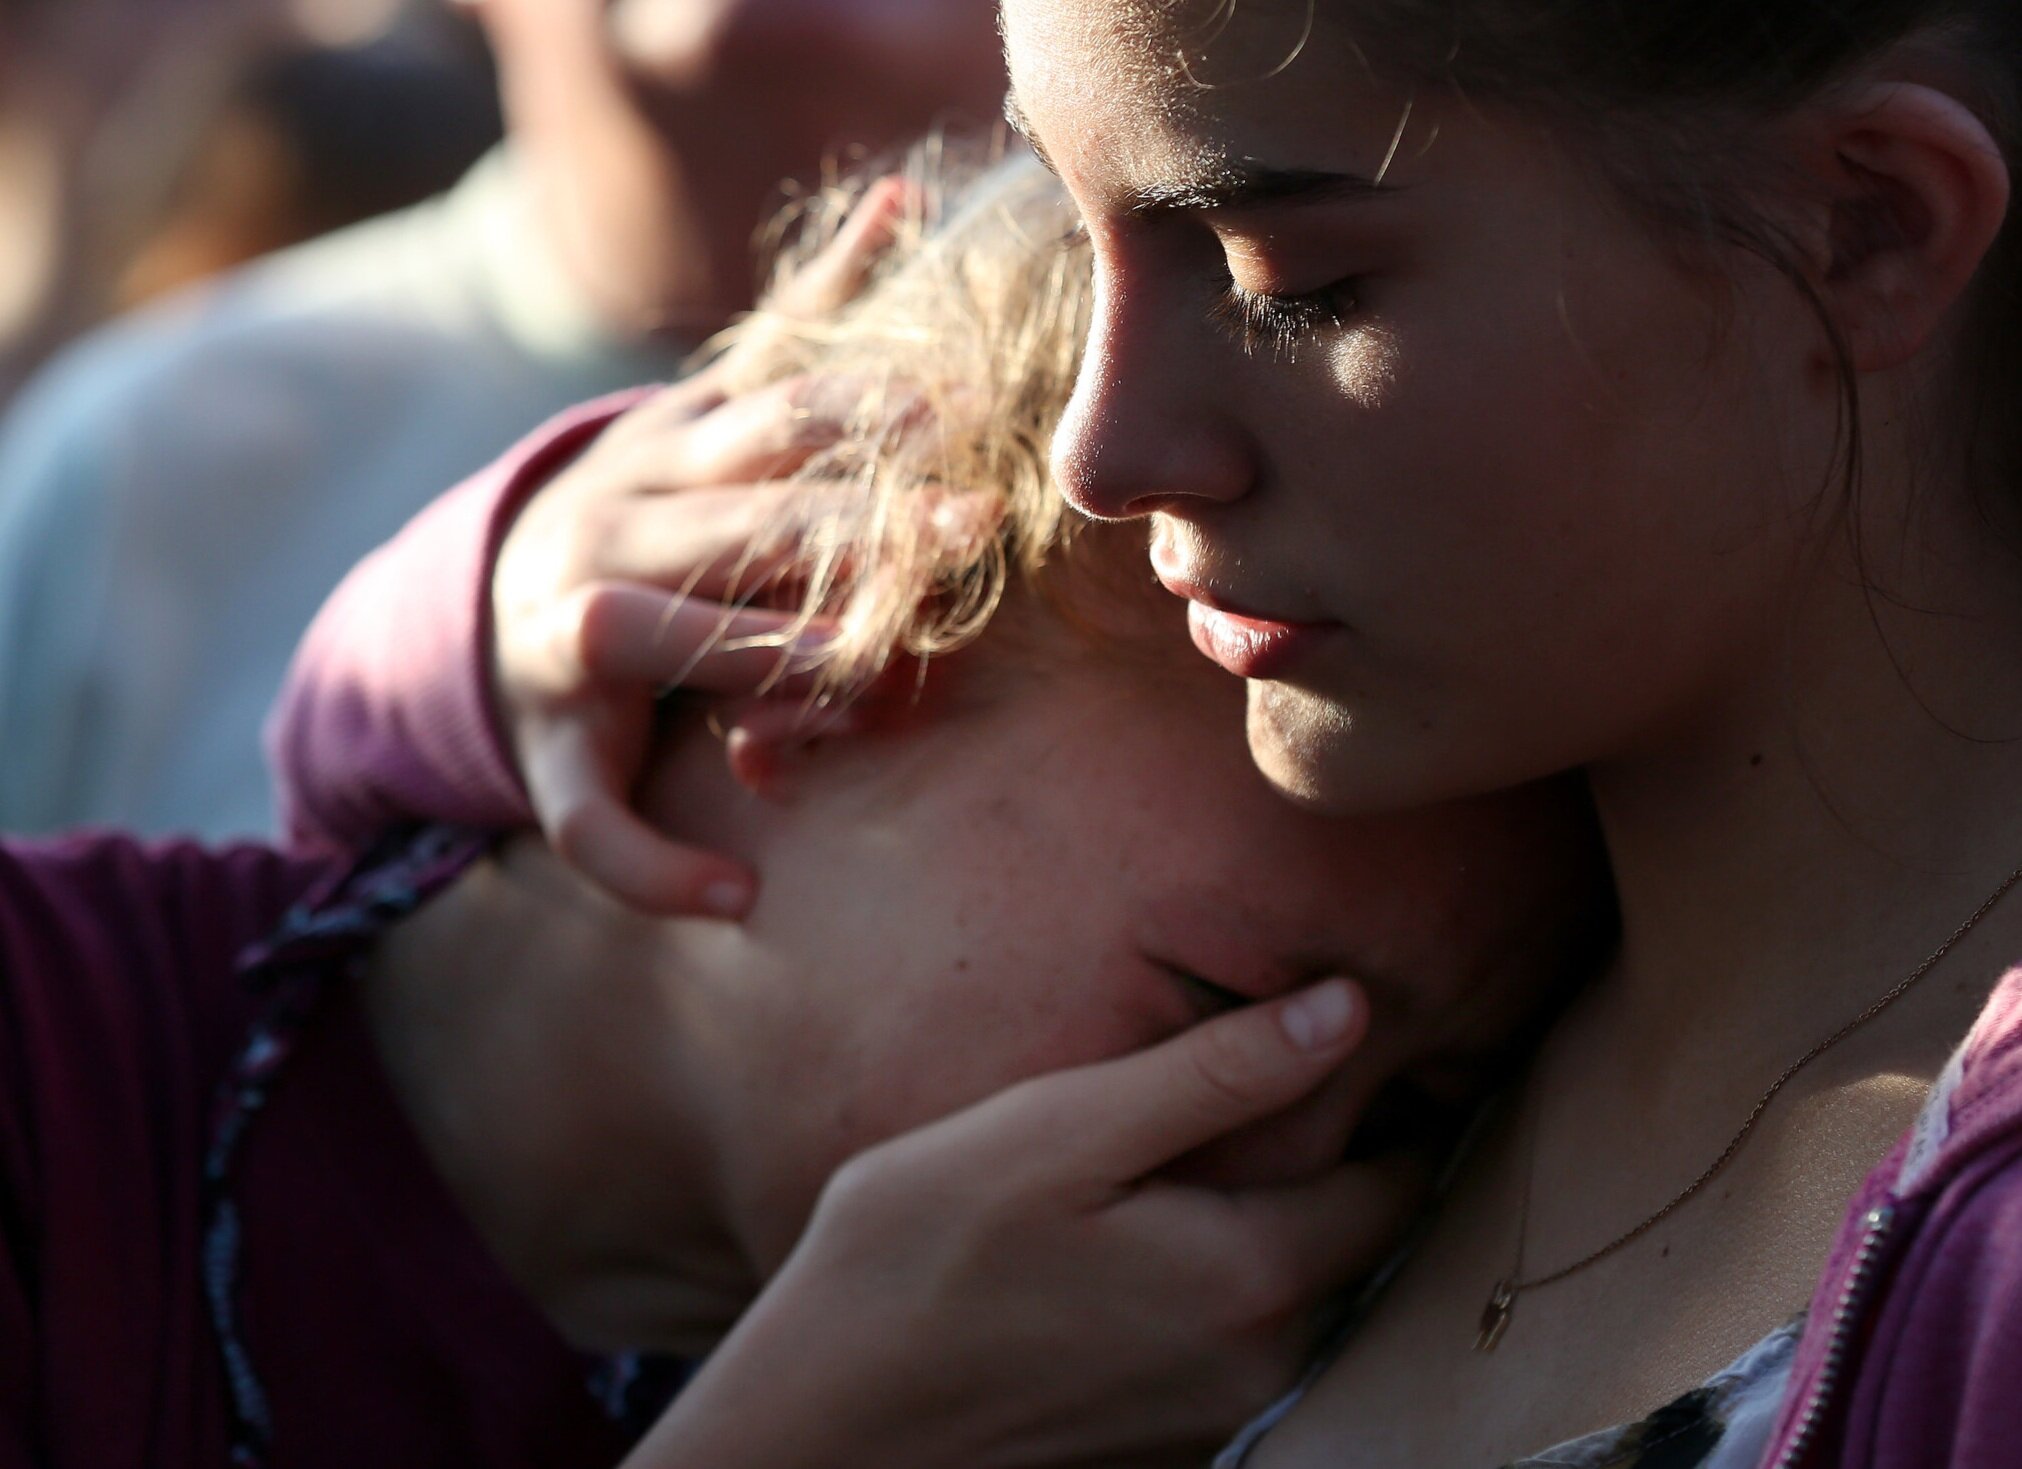  Abigail Adams, right, comforts her friend Hannah Hershey, 13, during a vigil for the victims of the Santa Fe High School mass shooting Friday, May 18, 2018, in Santa Fe, Texas. Hershey said she knew one of the 10 people who were killed at the high s